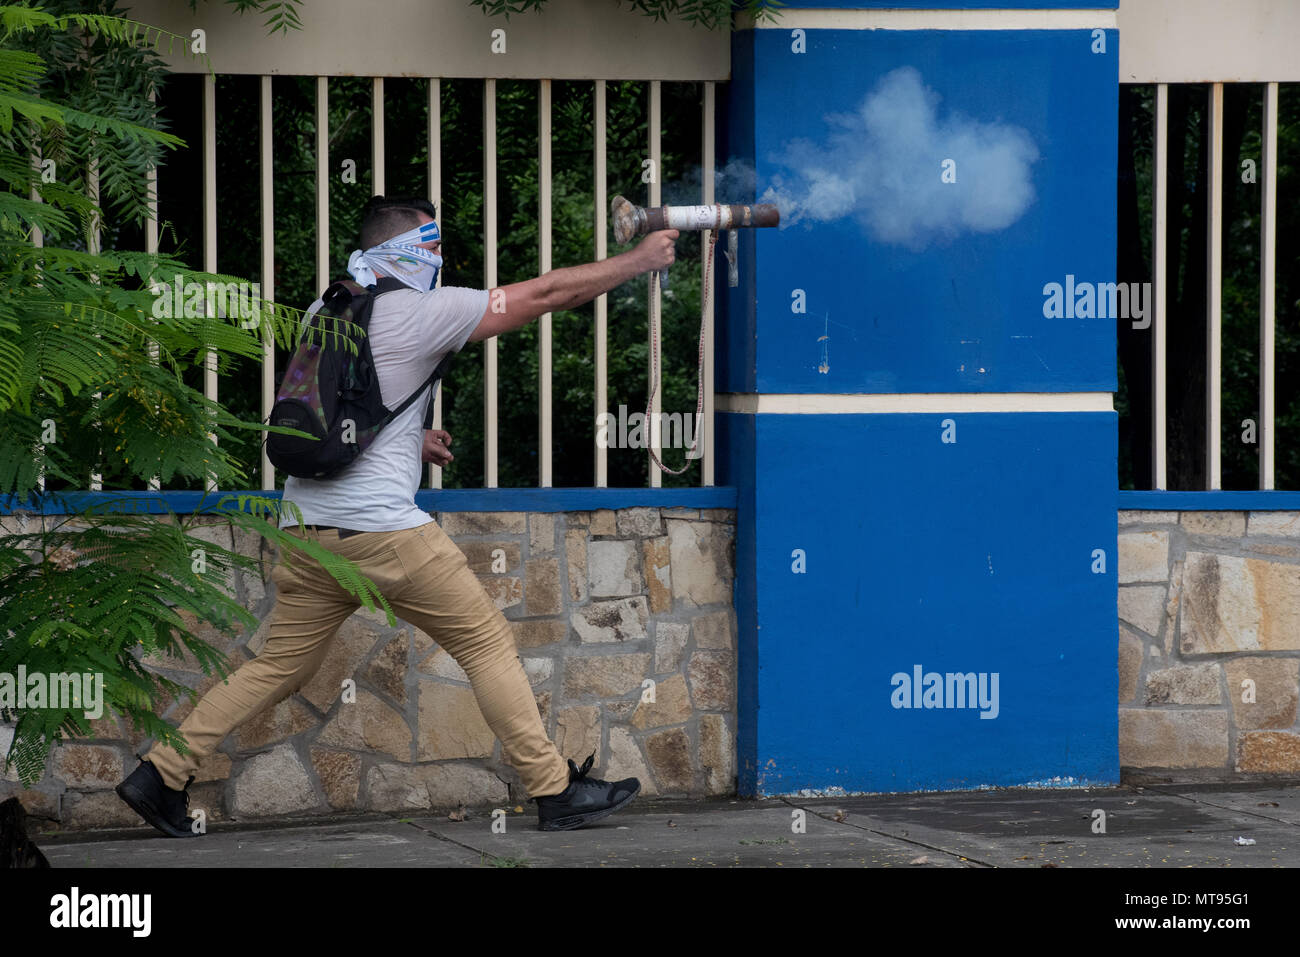 28 May 2018, Nicaragua, Managua: A hooded man shoots with an improvised weapon during protests surrounding the capture of the University of Engineering. Students had barricaded themselves in the university and demanded the independence of the educational establishment from the state. The clashes resulted in clashes between the students, security forces and an unidentified group. Photo: Carlos Herrera/dpa Stock Photo